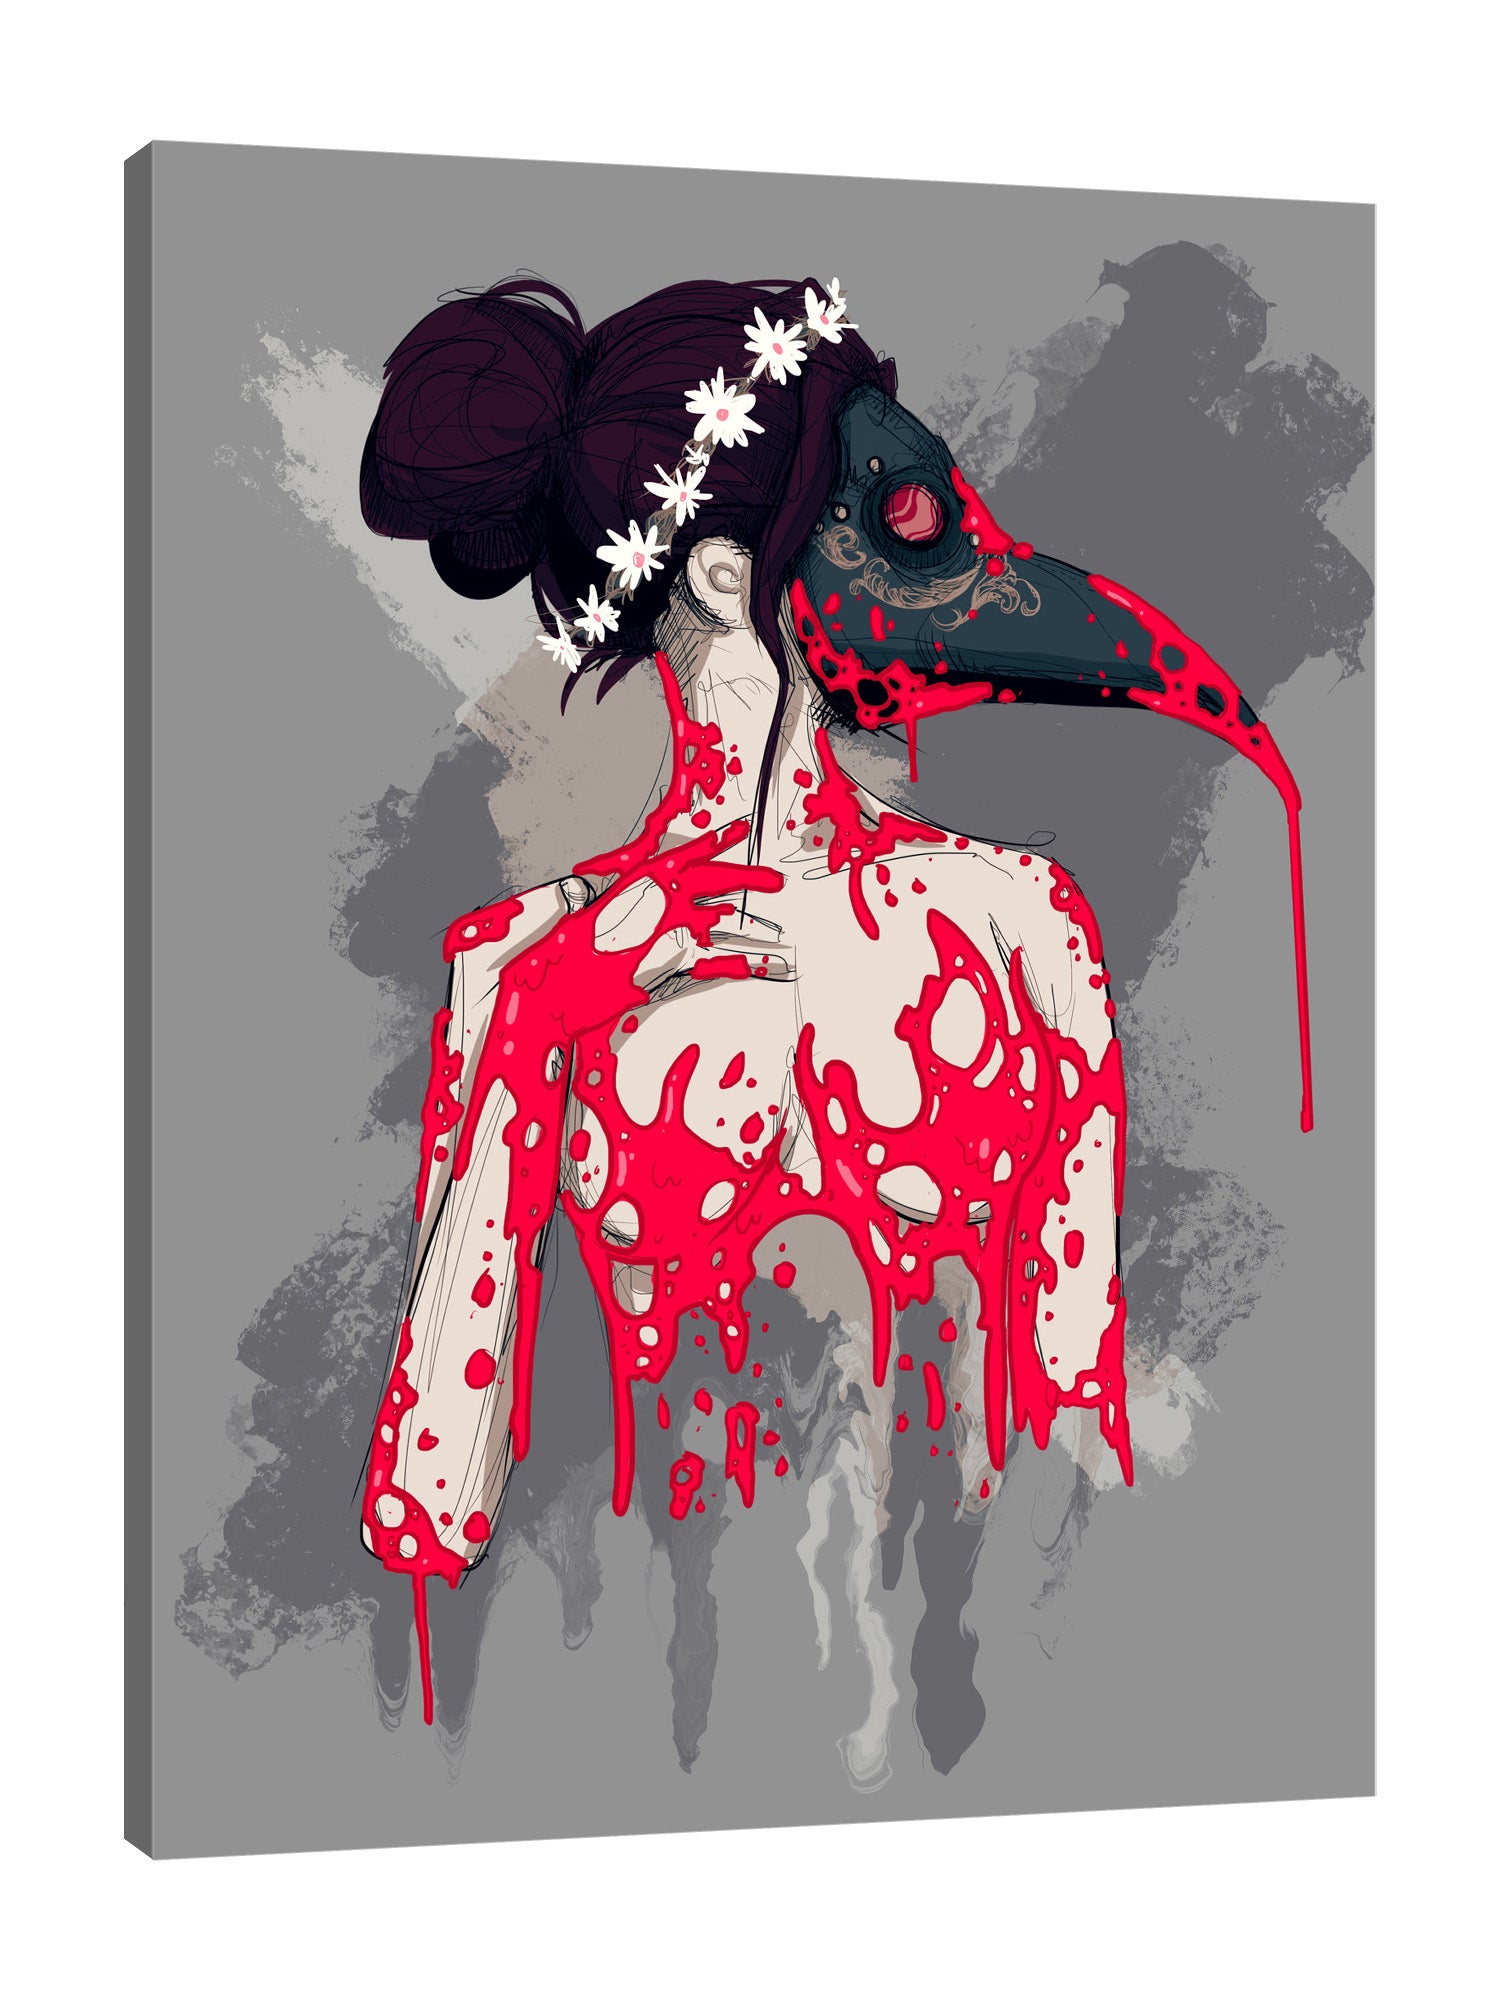 Ludwig-Van-Bacon,Vertical,3X4,Modern & Contemporary,Fantasy & Sci-Fi,Entertainment,People,Floral & Botanical,woman,lady,mask,masks,bloody,blood,red,paint drips,drips,paint drip,drip,nude,floral,florals,flower,flowers,Purple,White,Charcoal Gray,Gray,Mist Gray